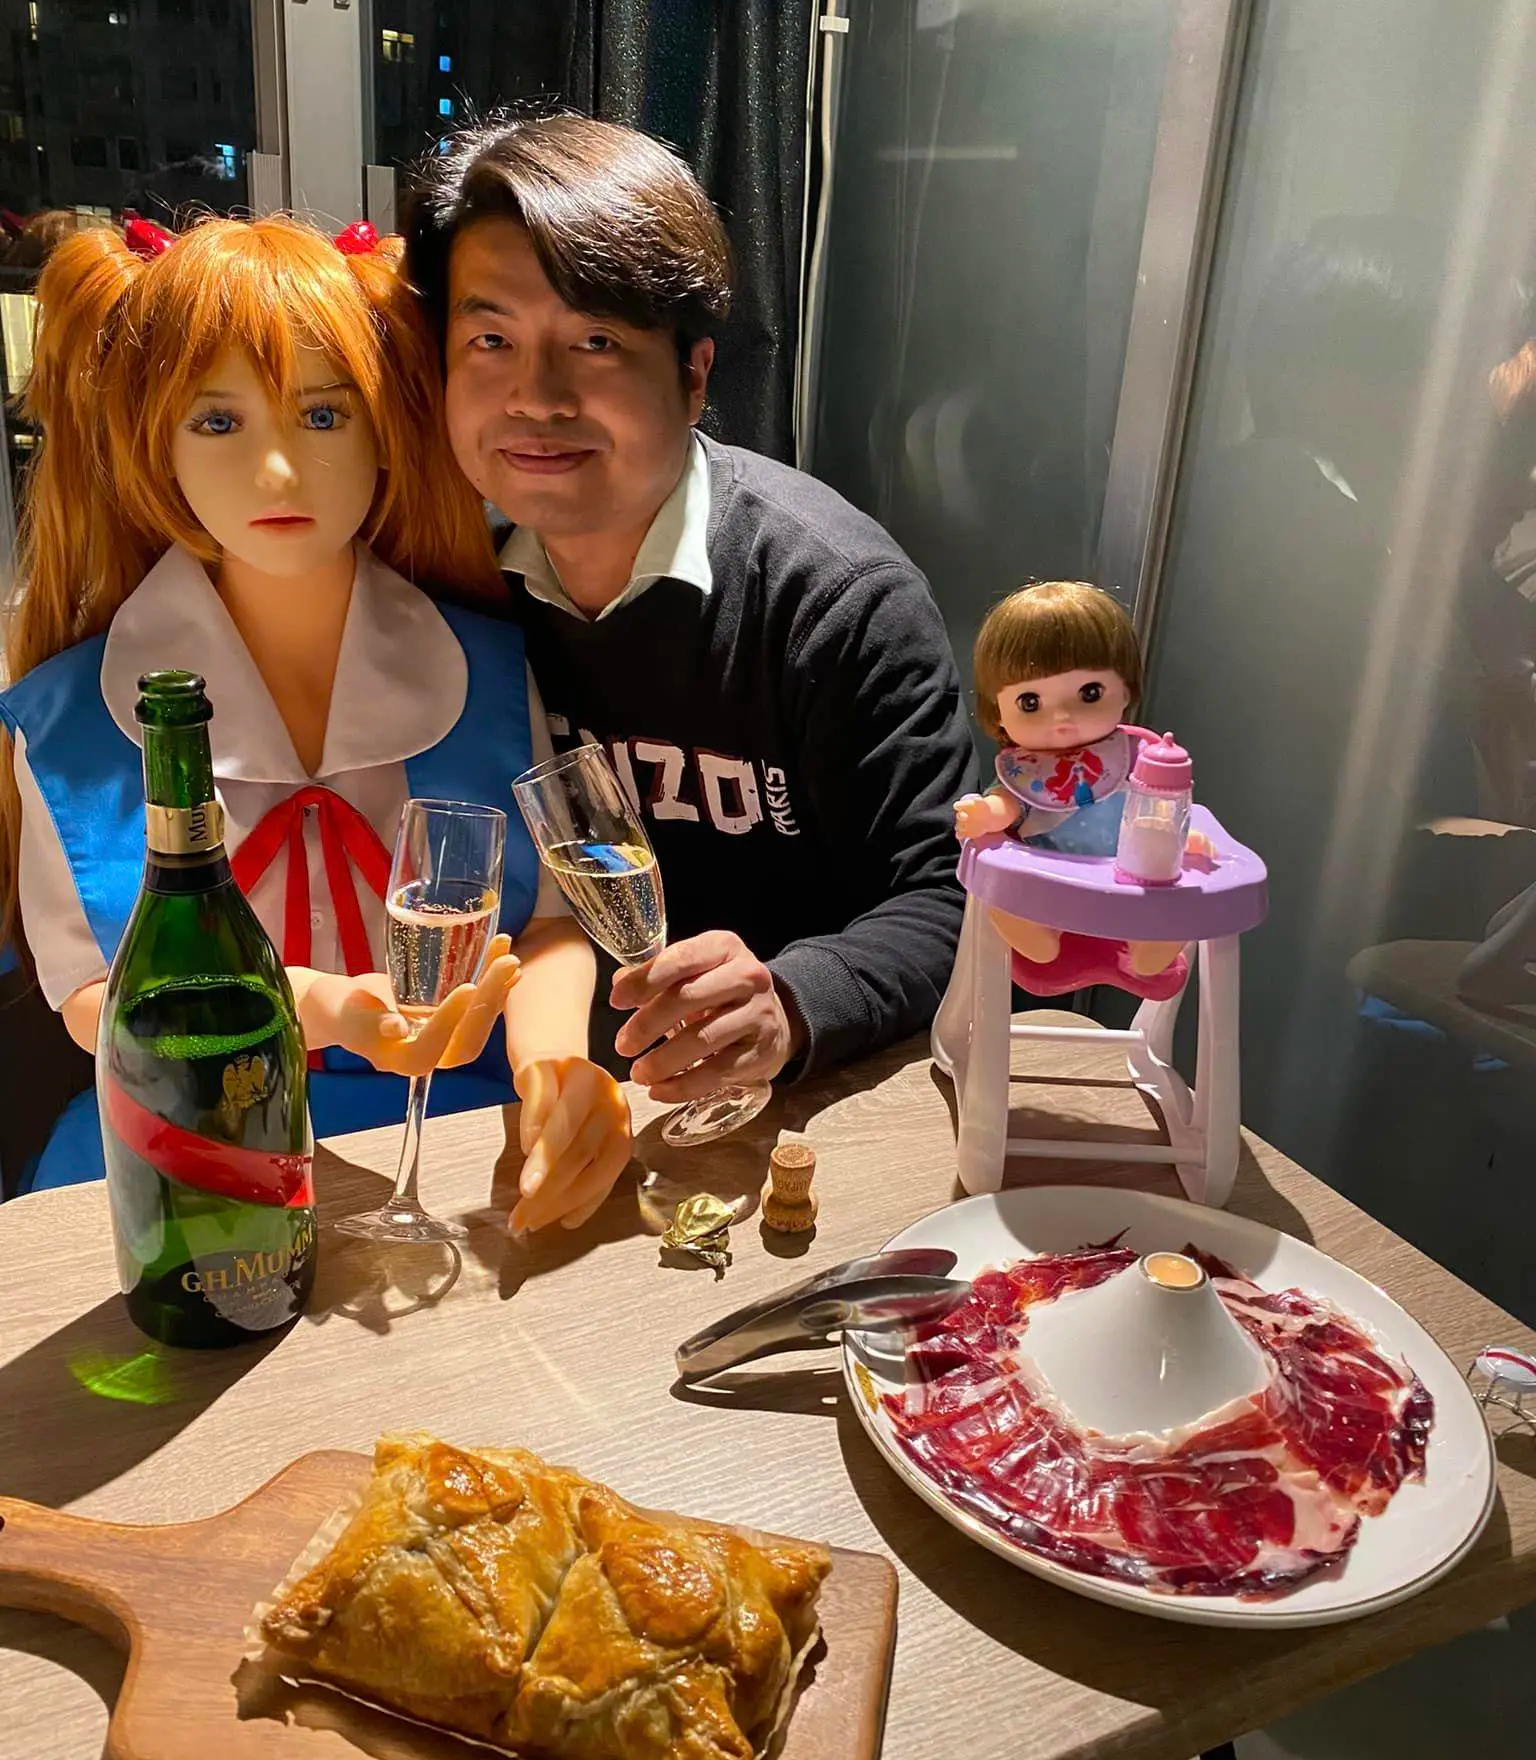 The man married an 'anime doll' as his wife because he did not want any conflict in the family - Photo 3.